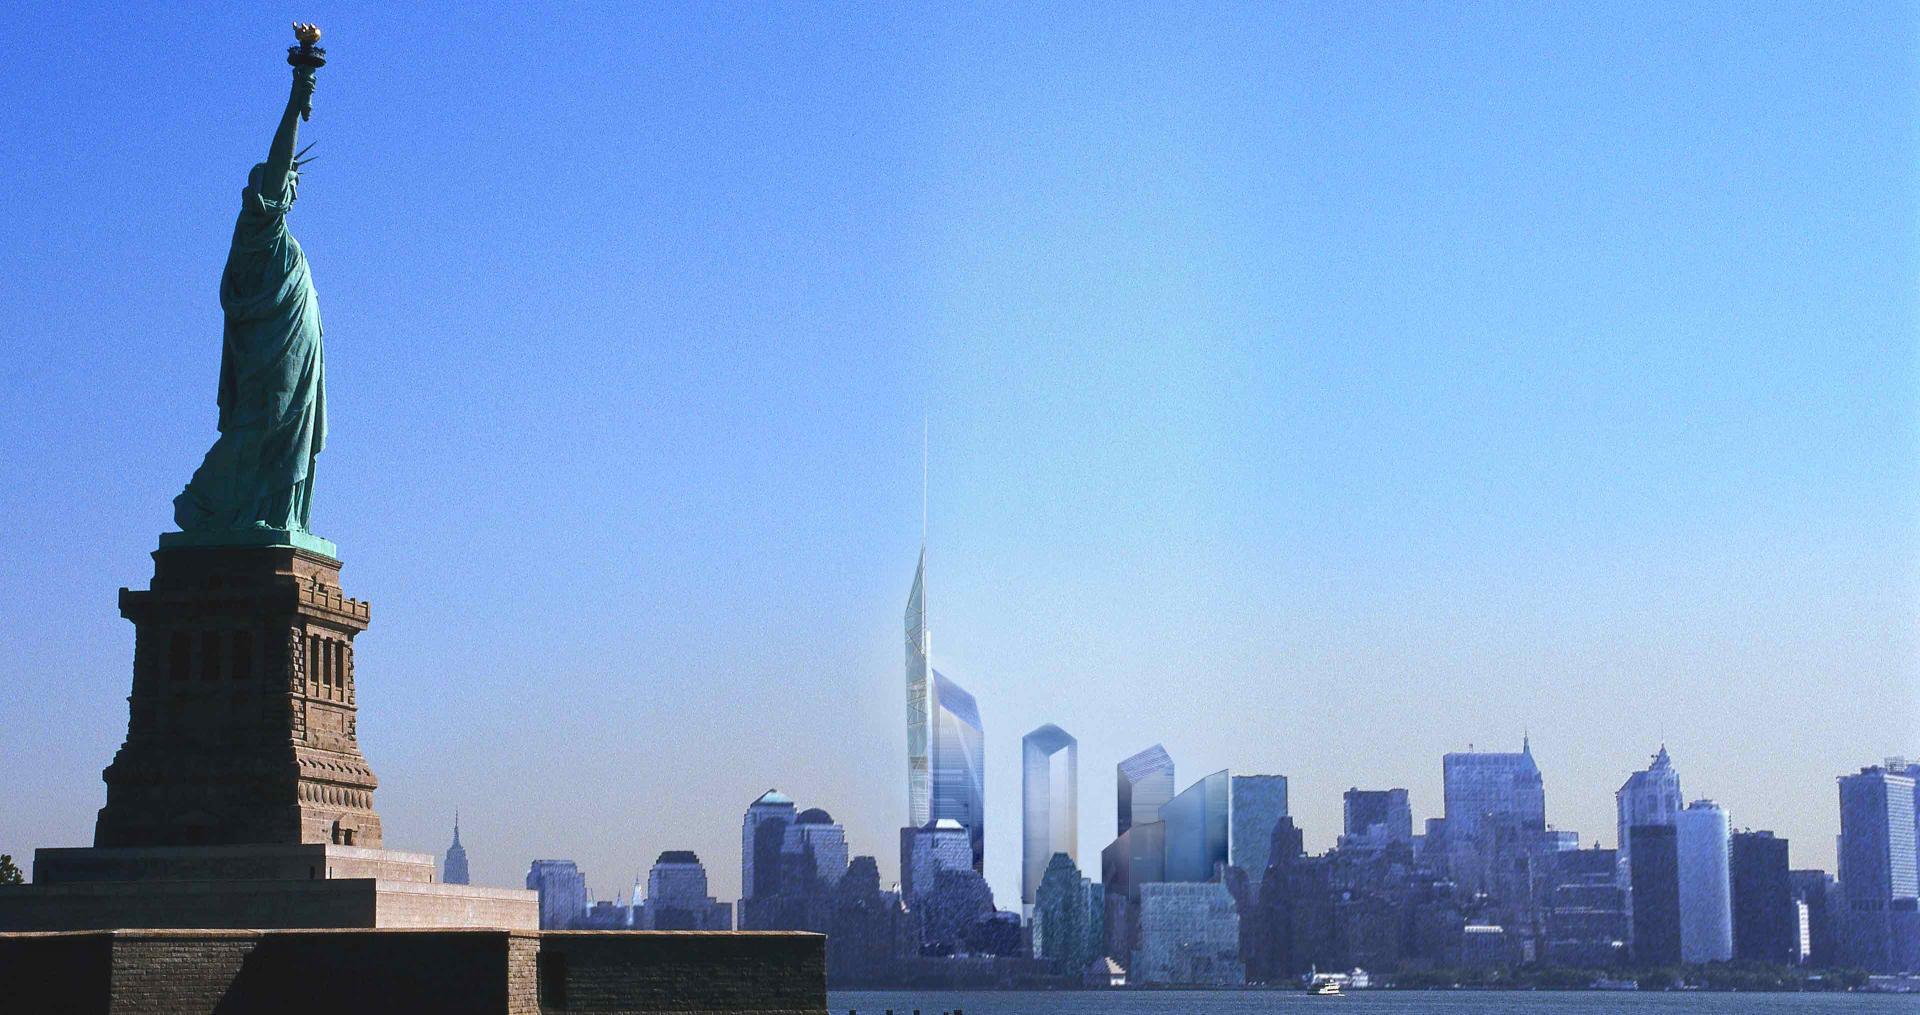 3D rendering of New York skyline with Statue of Liberty and sketch of World Trade Center area